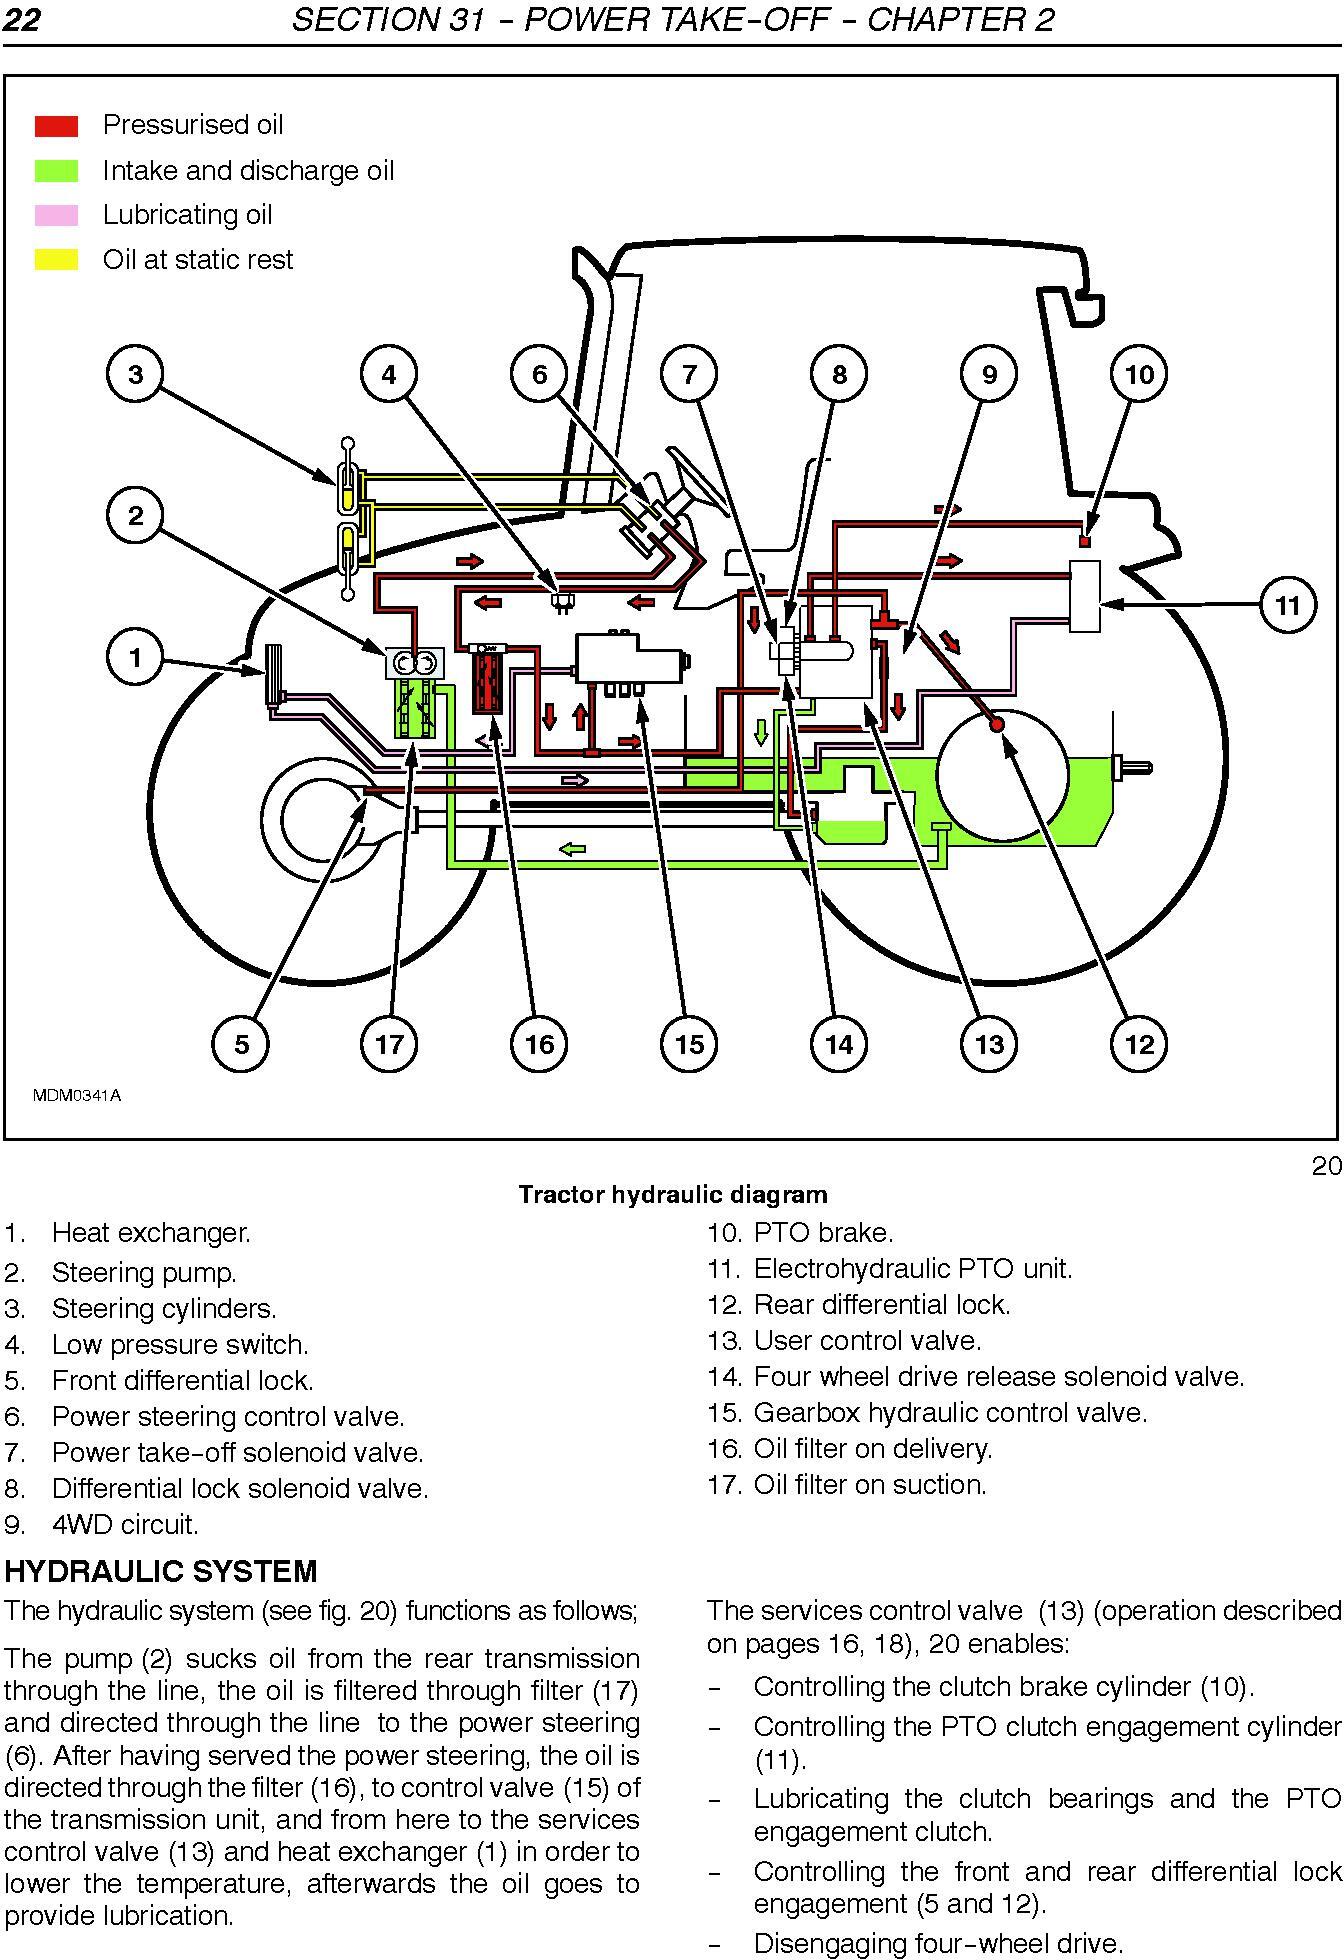 New Holland T5040, T5050, T5060, T5070 Tractor Service Manual - 2